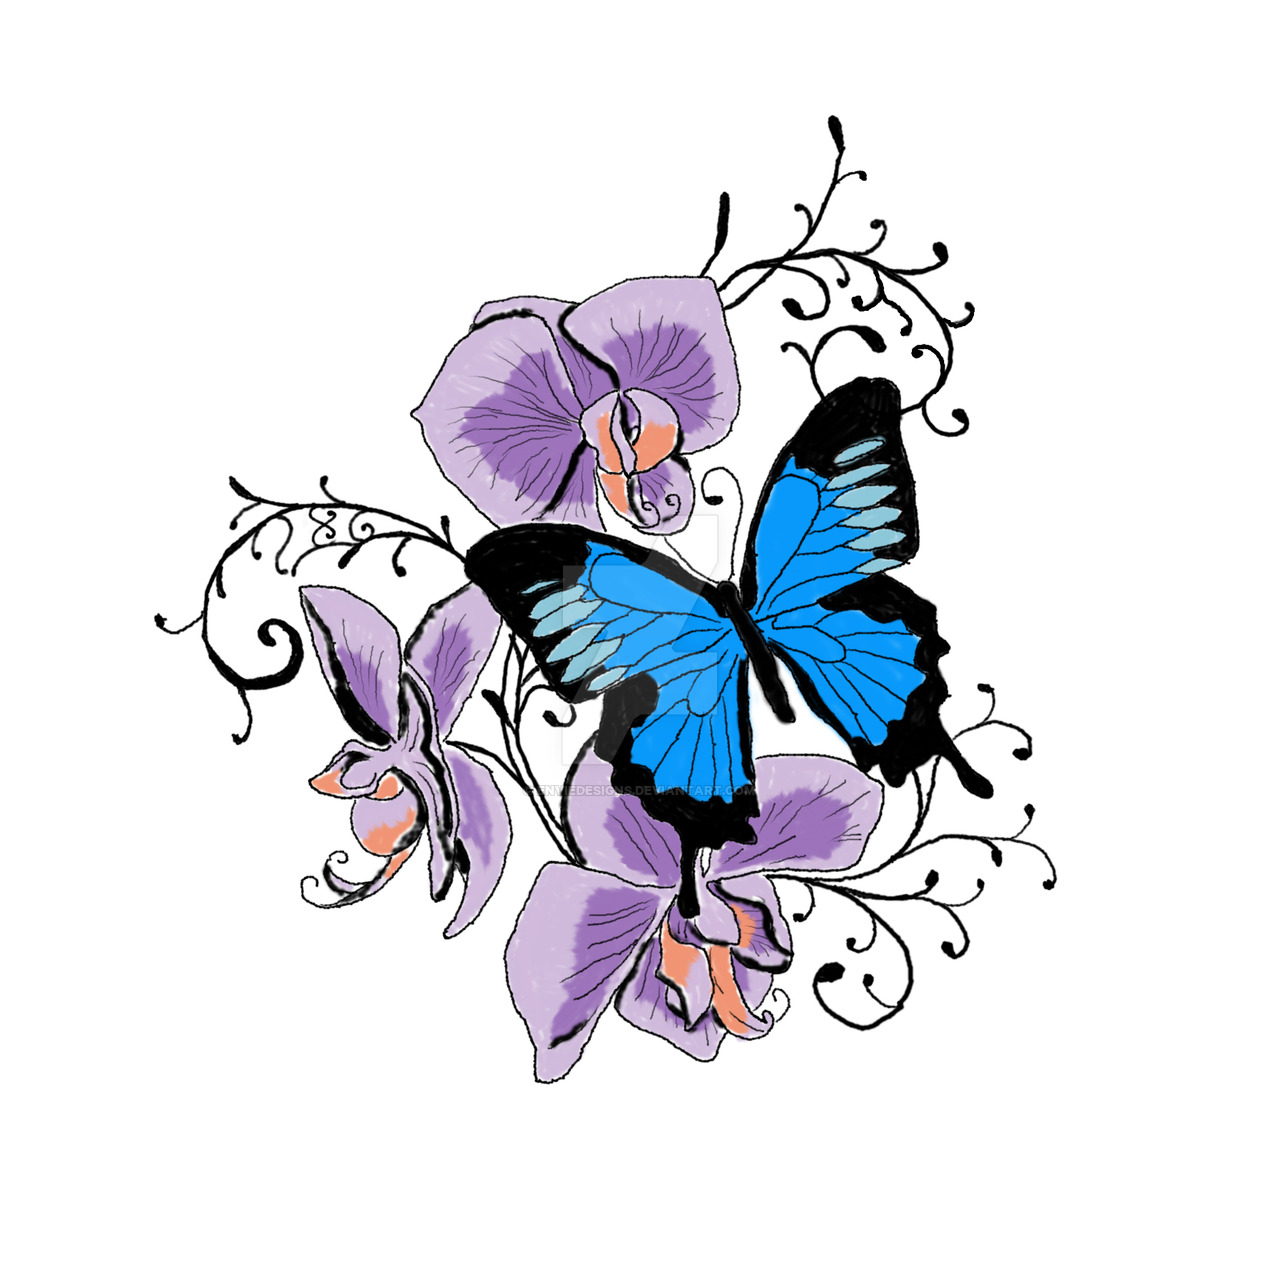 Chic purple orchids and bright blue butterfly tattoo design by Enviedesigns